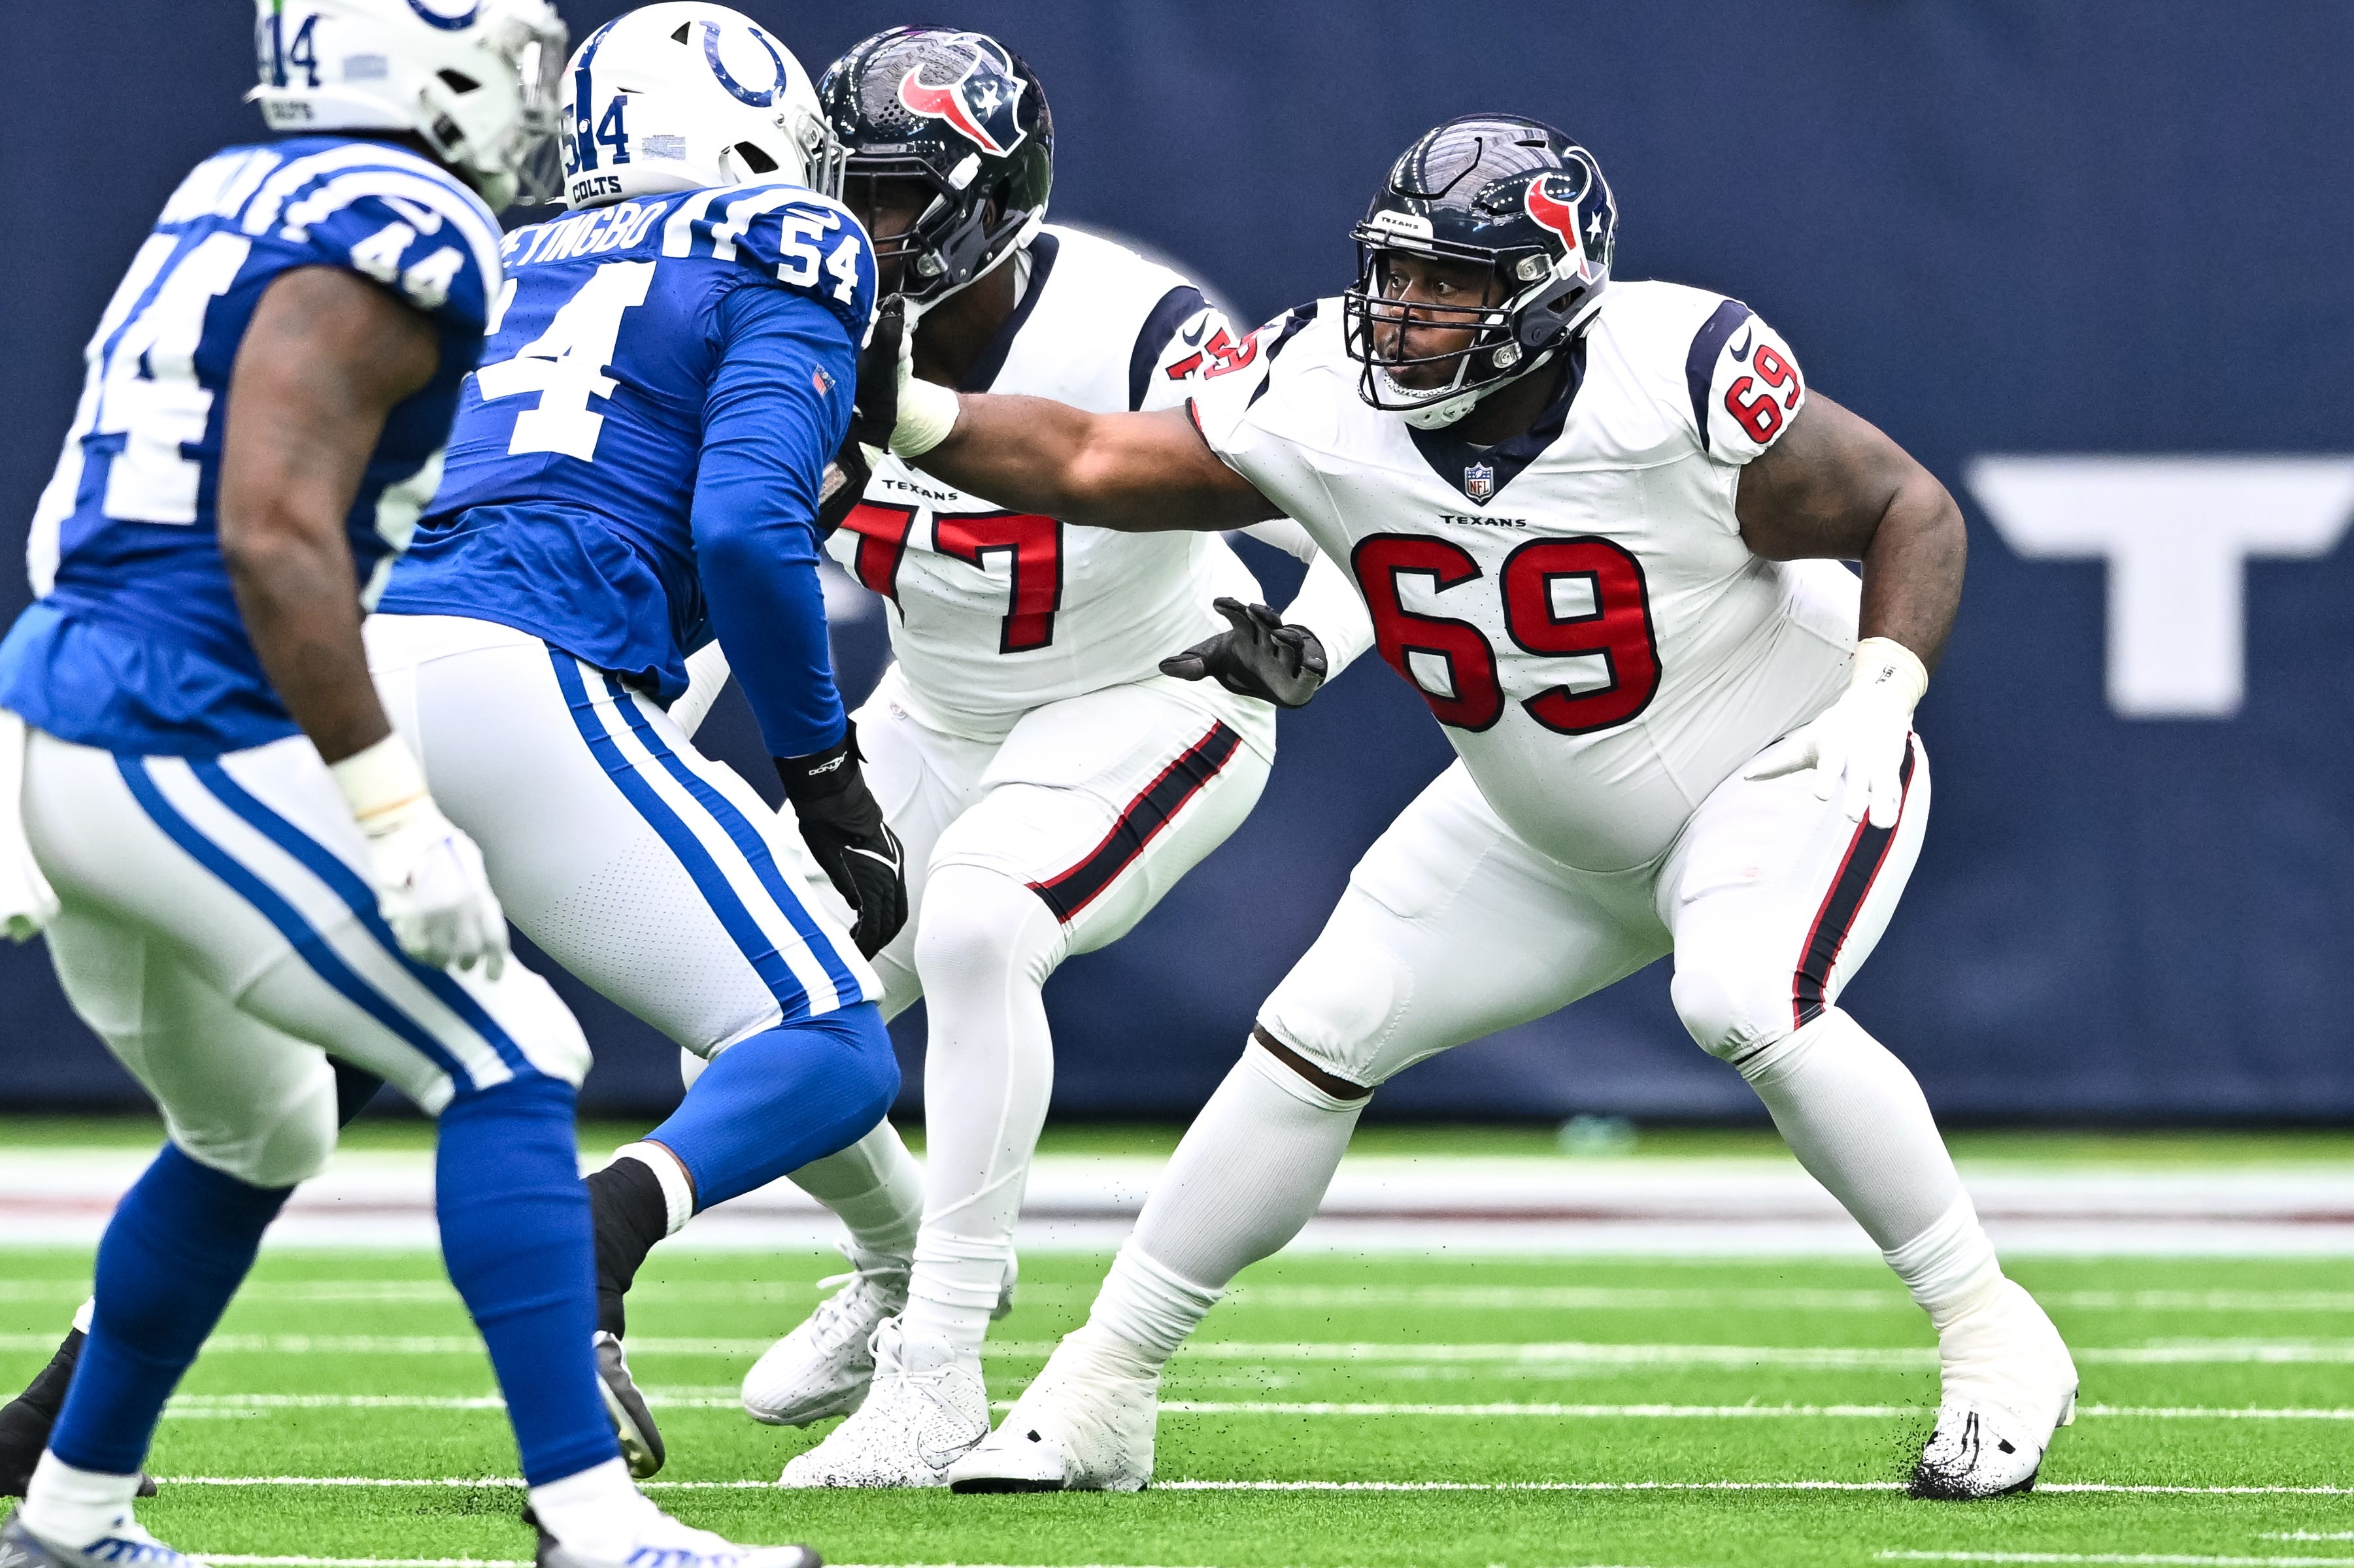 how the texans created $6.4 million in shaq mason's restructured contract